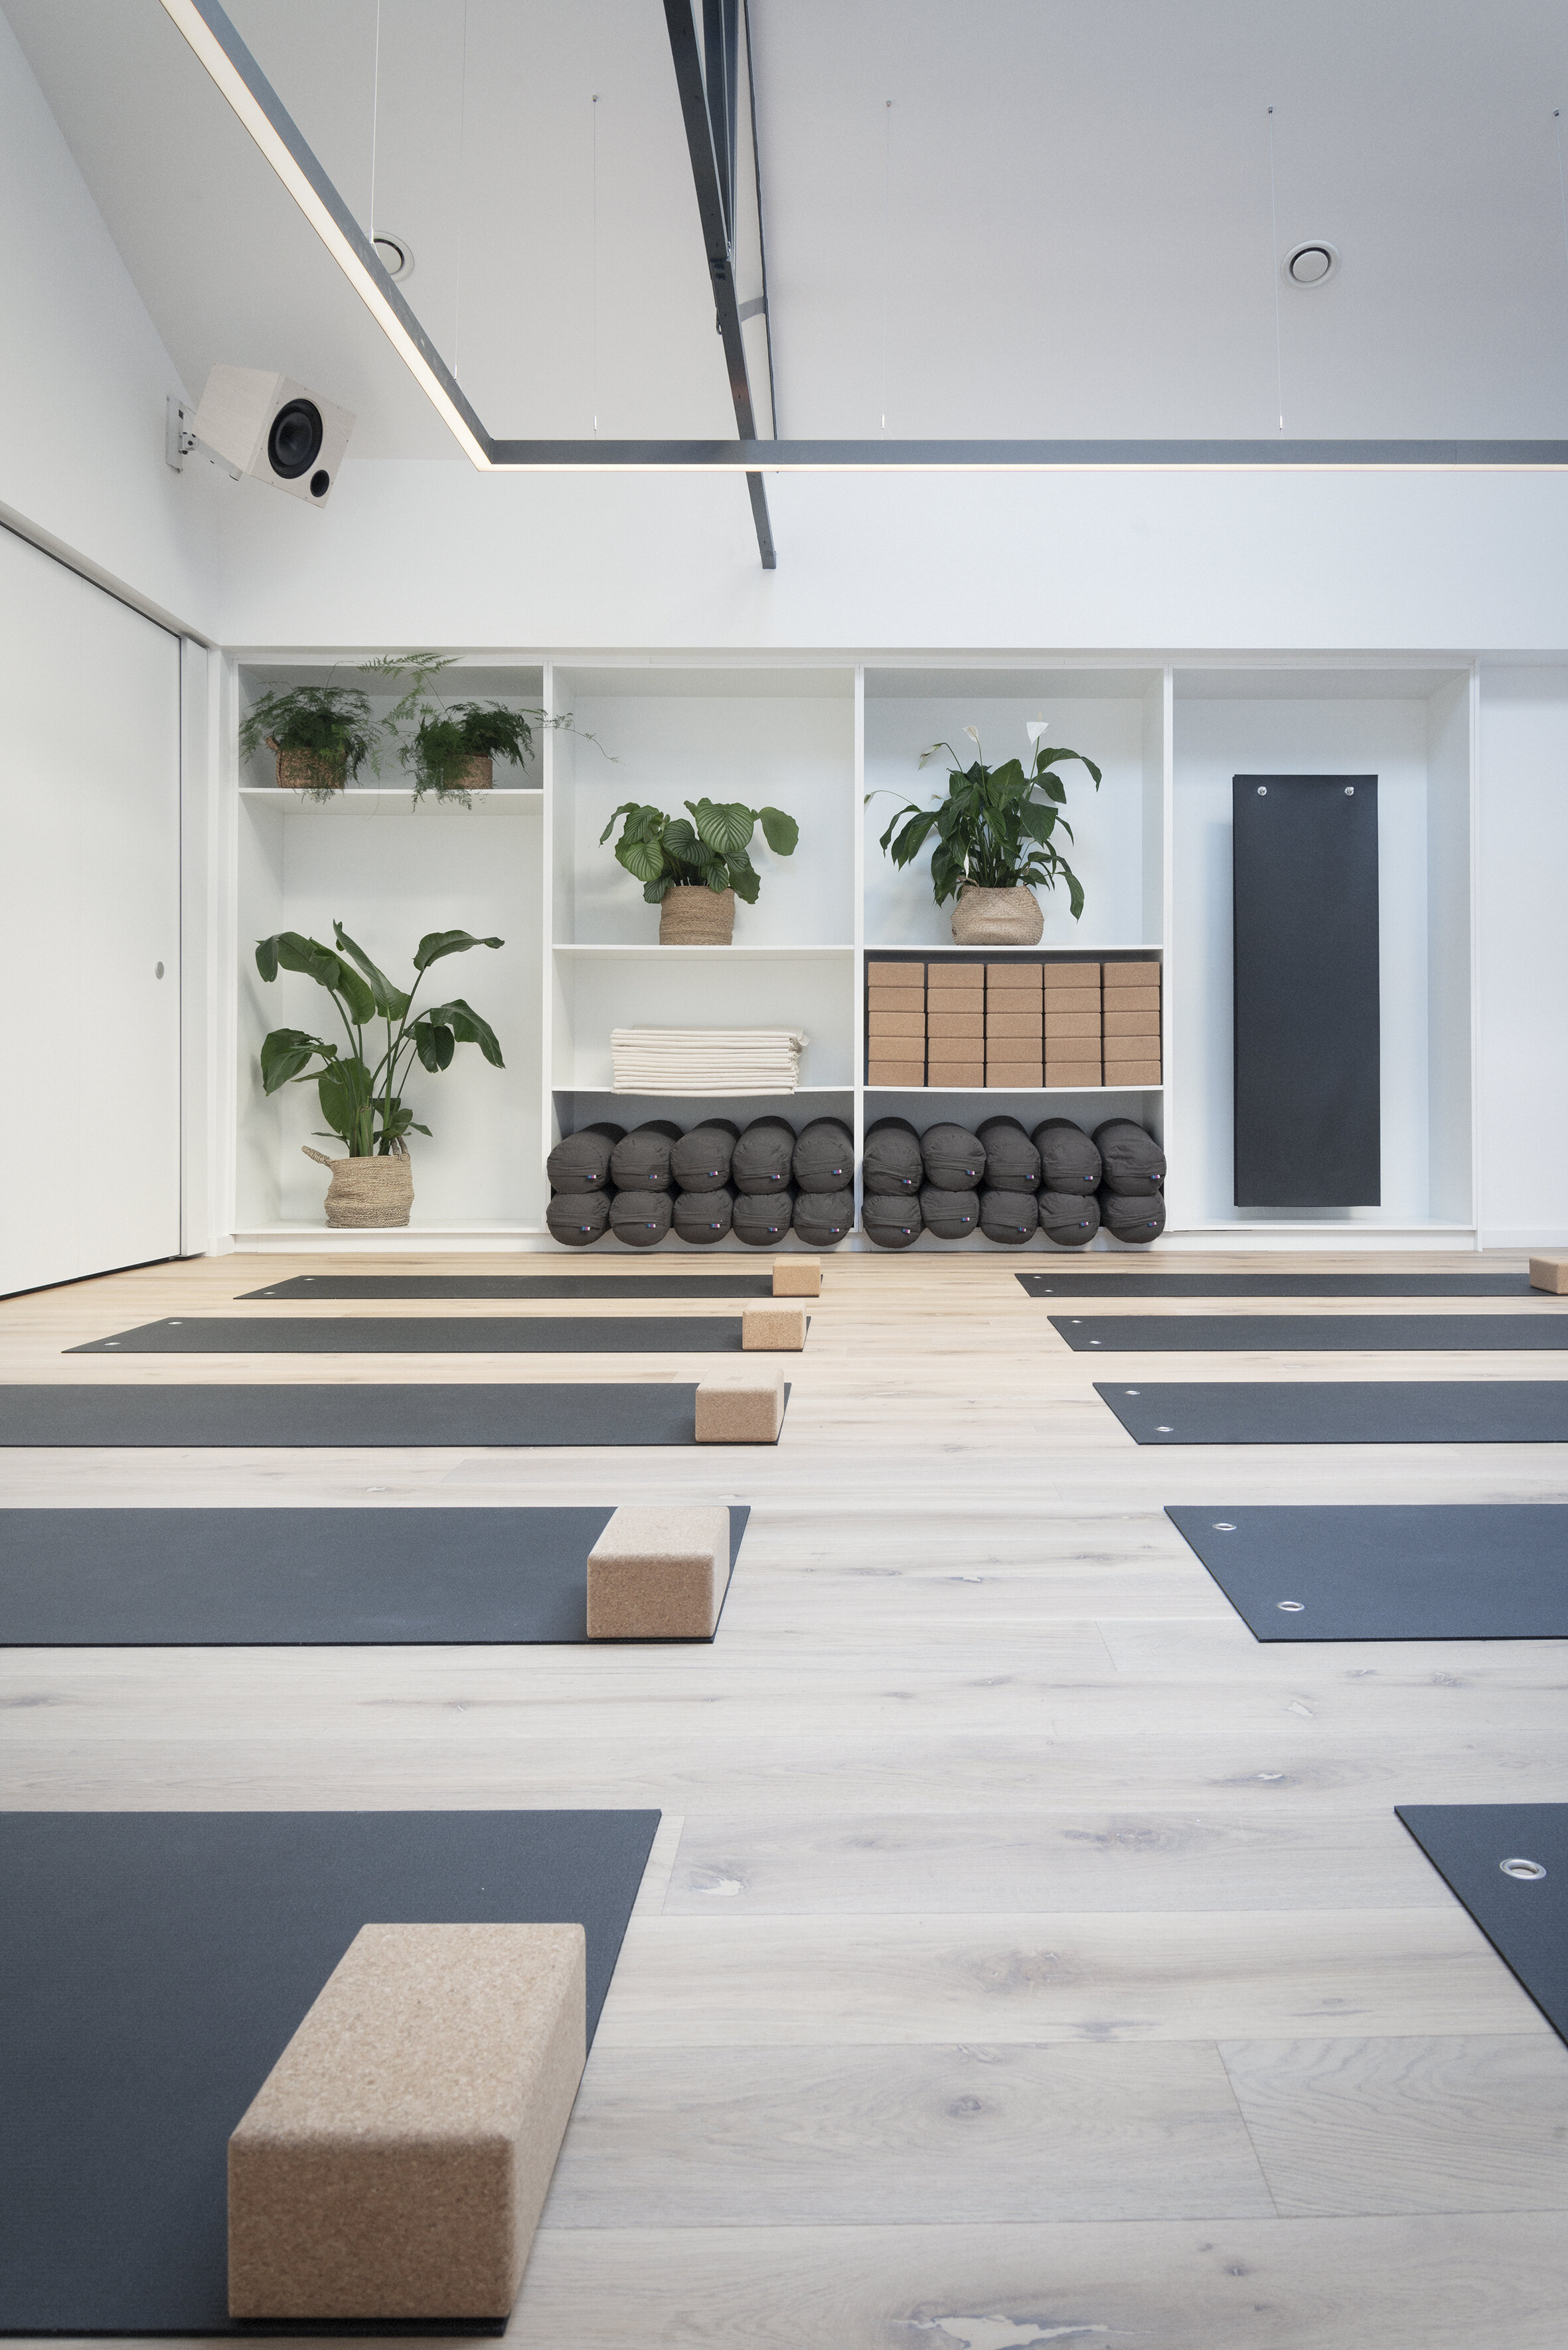 arctangent architecture + design [aa+d] - earth yoga nyc  interior design  for a contemporary space of modern yoga